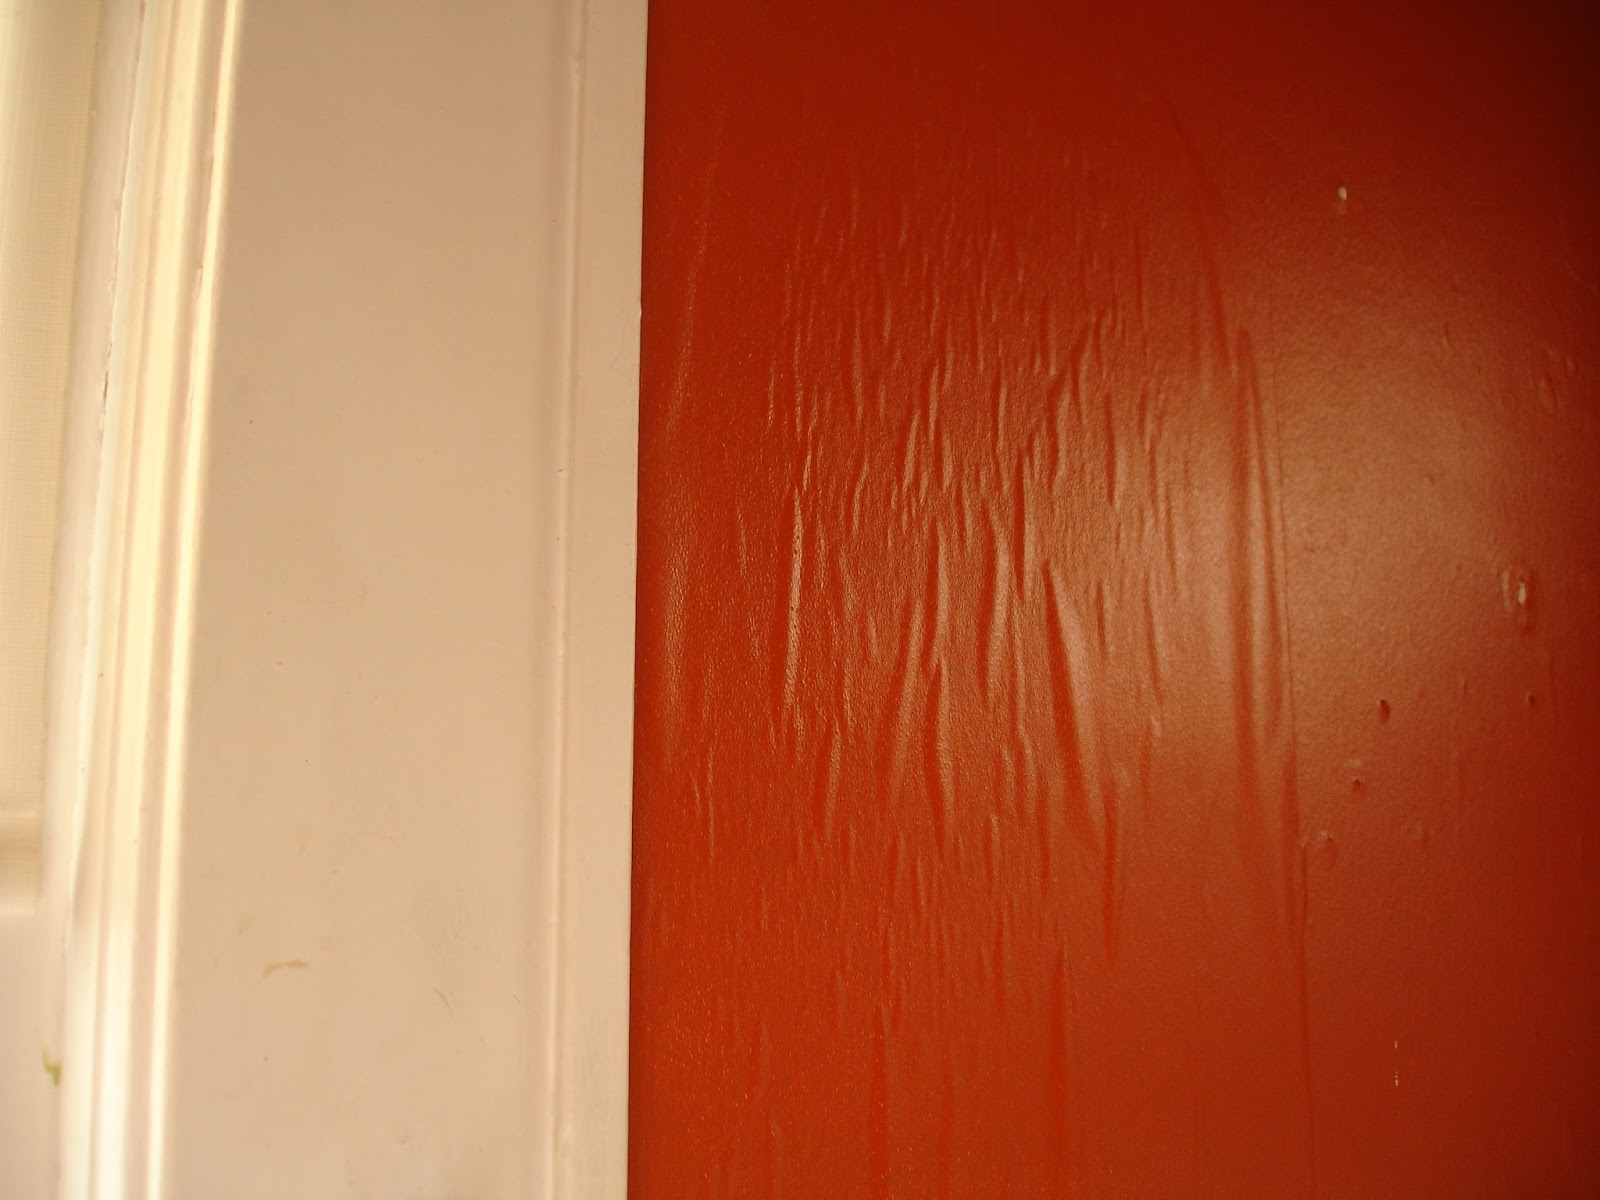 Wallpaper Glue And Repair All Surfaces Before Applying Primer